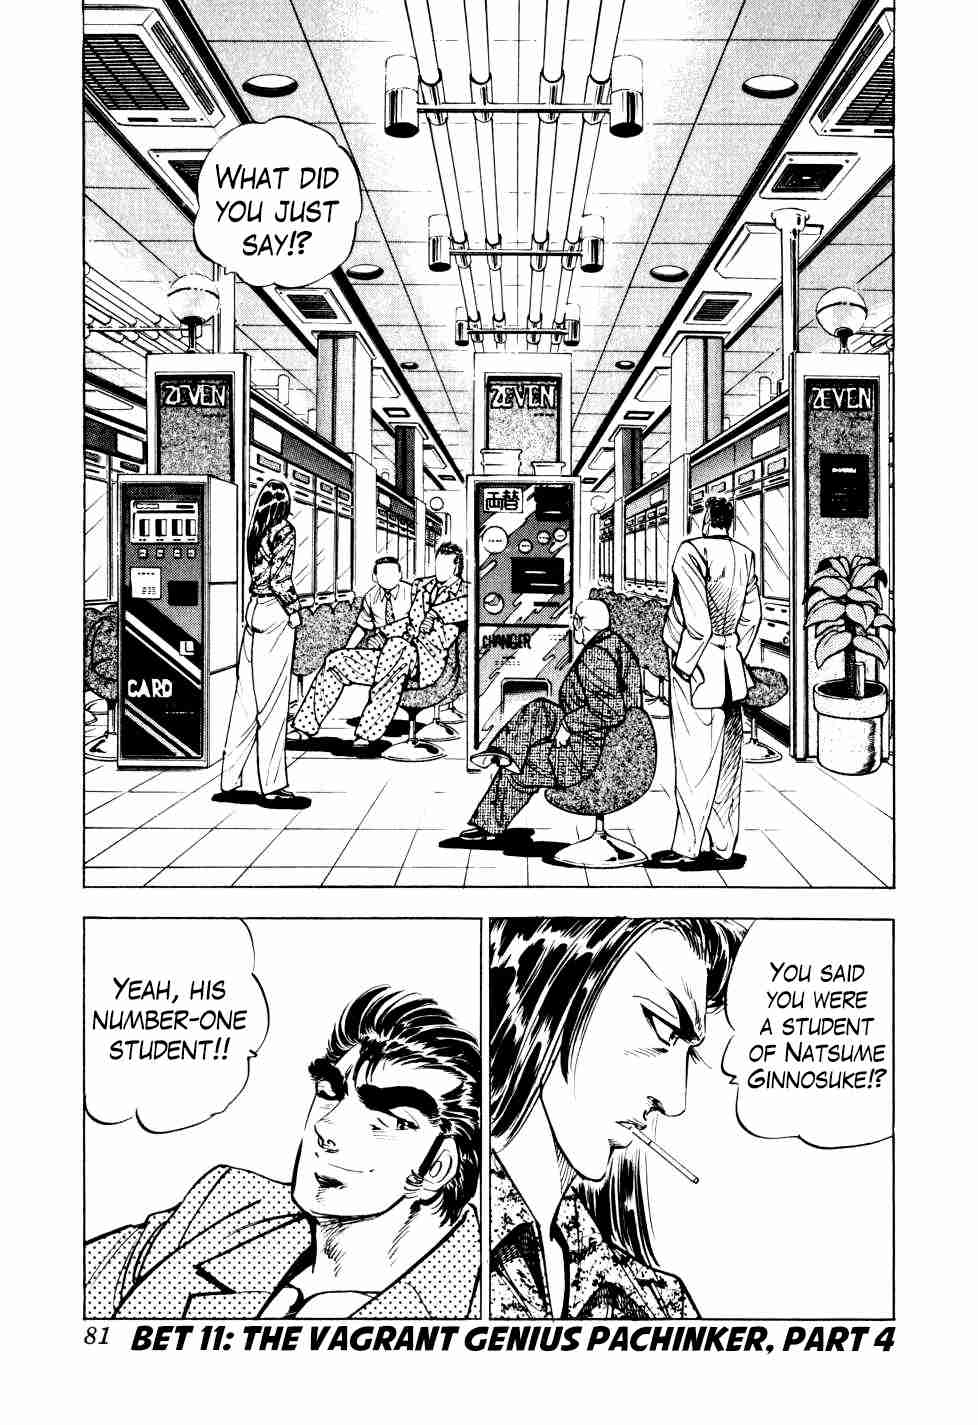 Legend of the End of Century Gambling Wolf Saga Vol. 2 Ch. 11 The Vagrant Genius Pachinko Player, Part 4